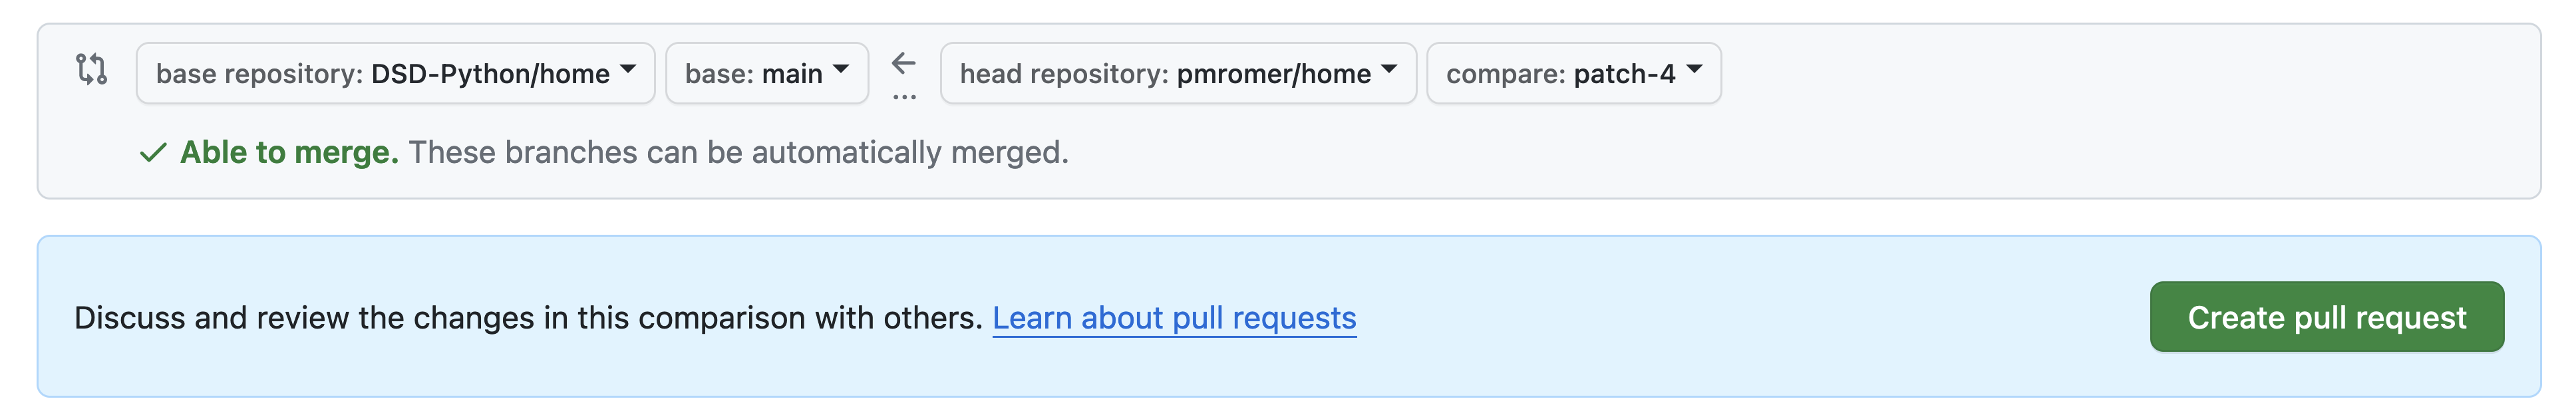 pull request button from github.com